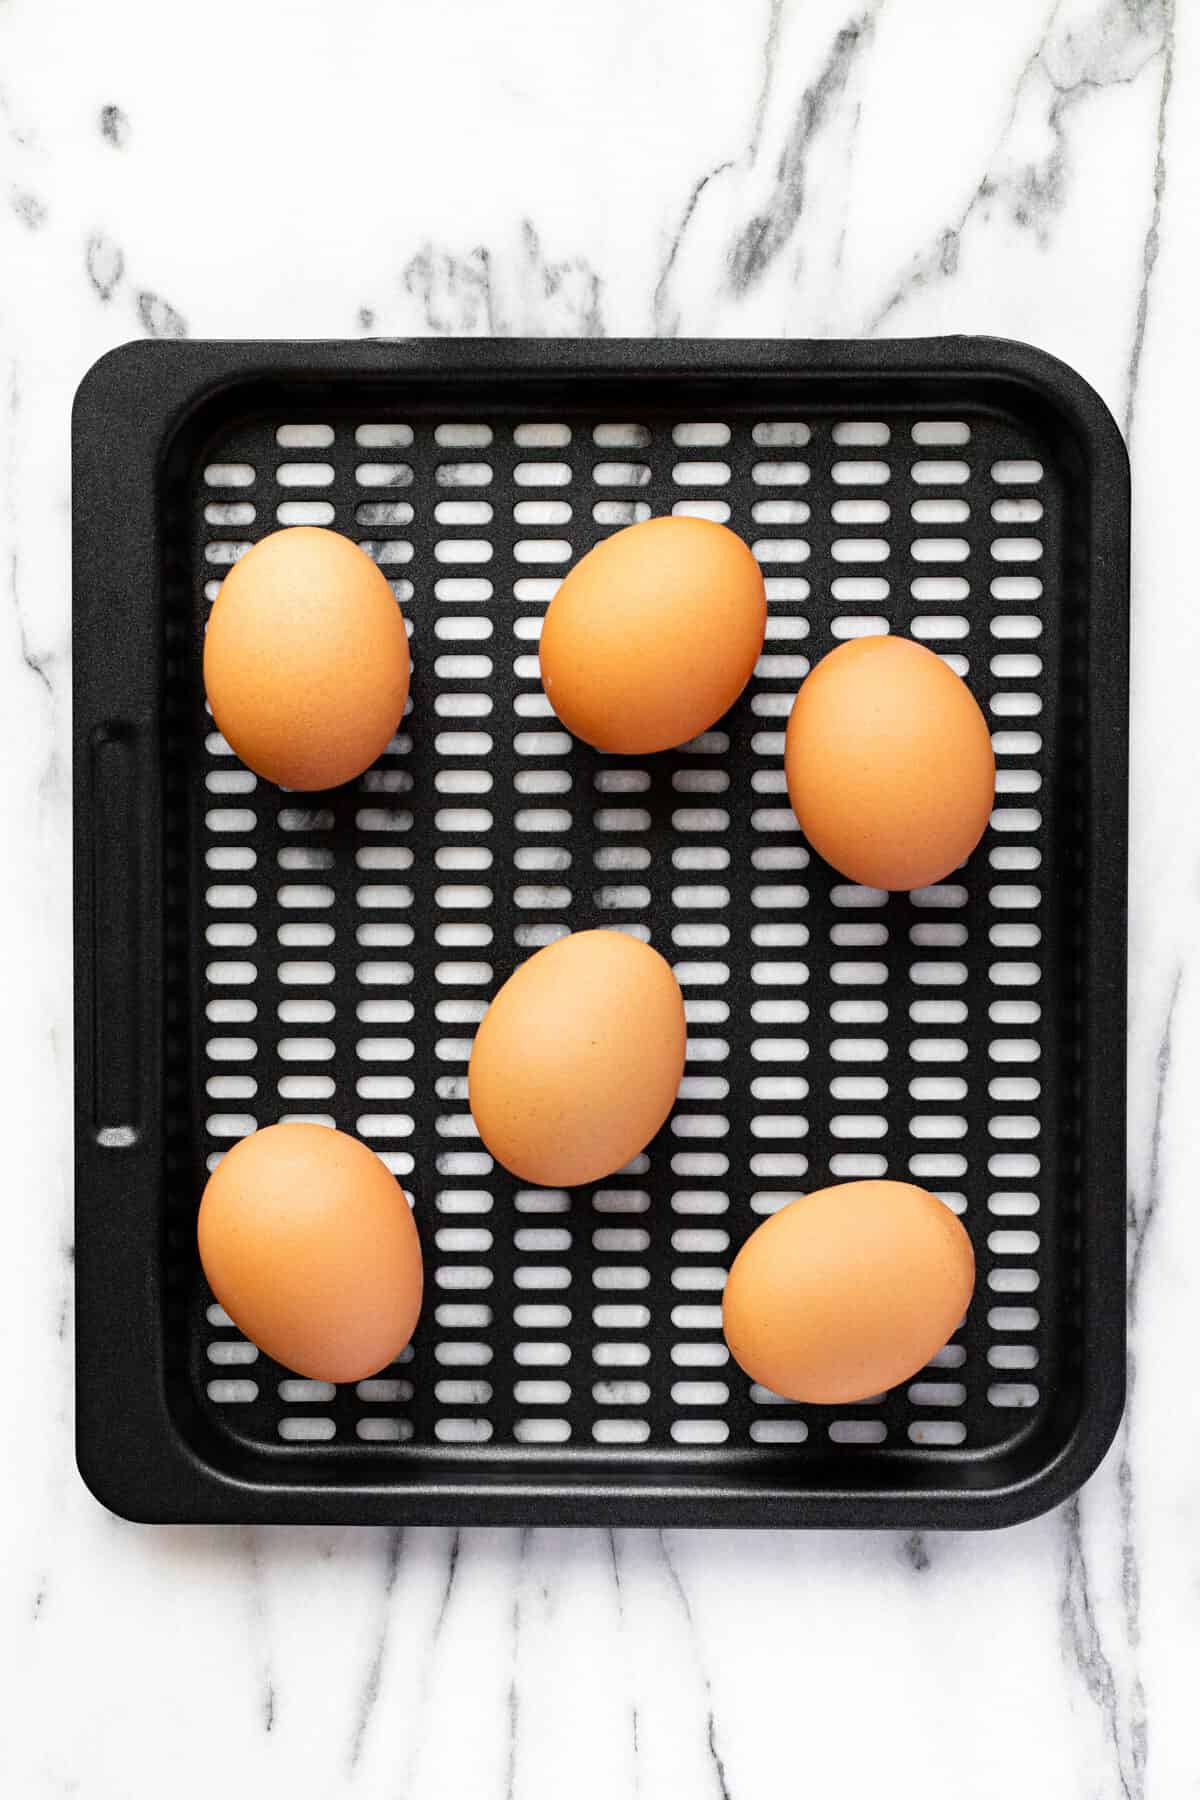 Black air fryer tray with brown eggs on it.